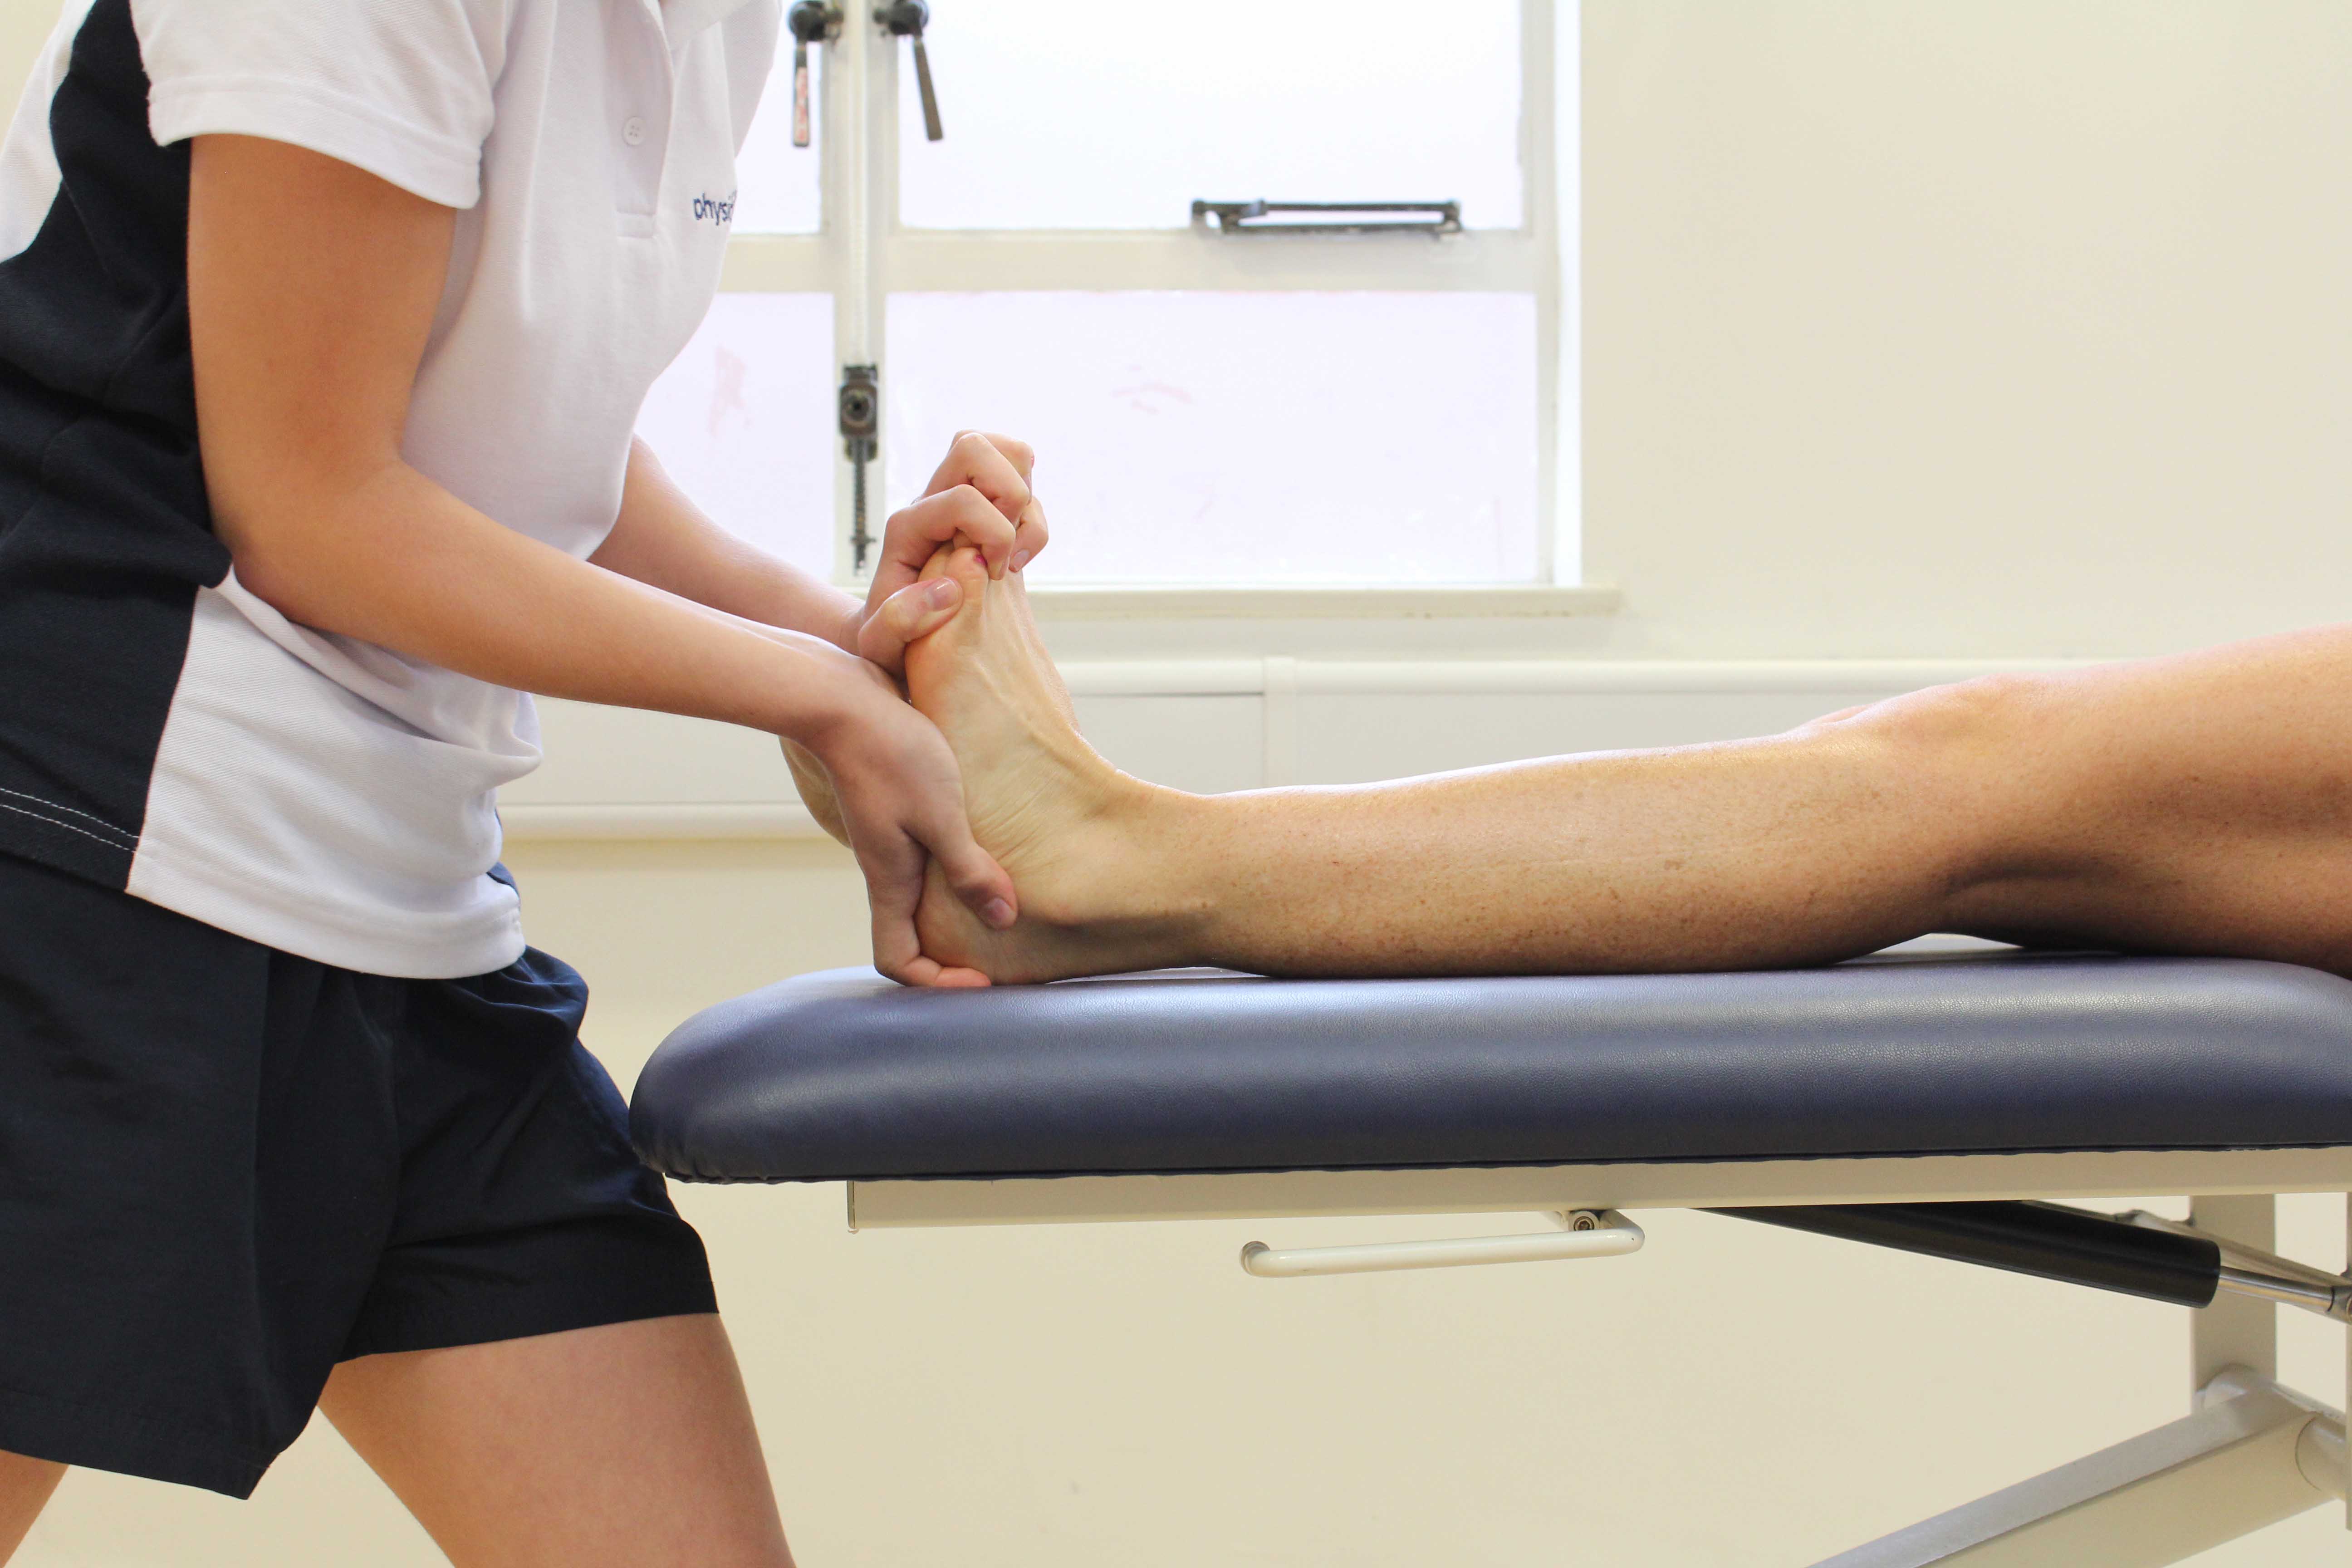 Ankle Fusion - Ankle - Surgery - What We Treat 